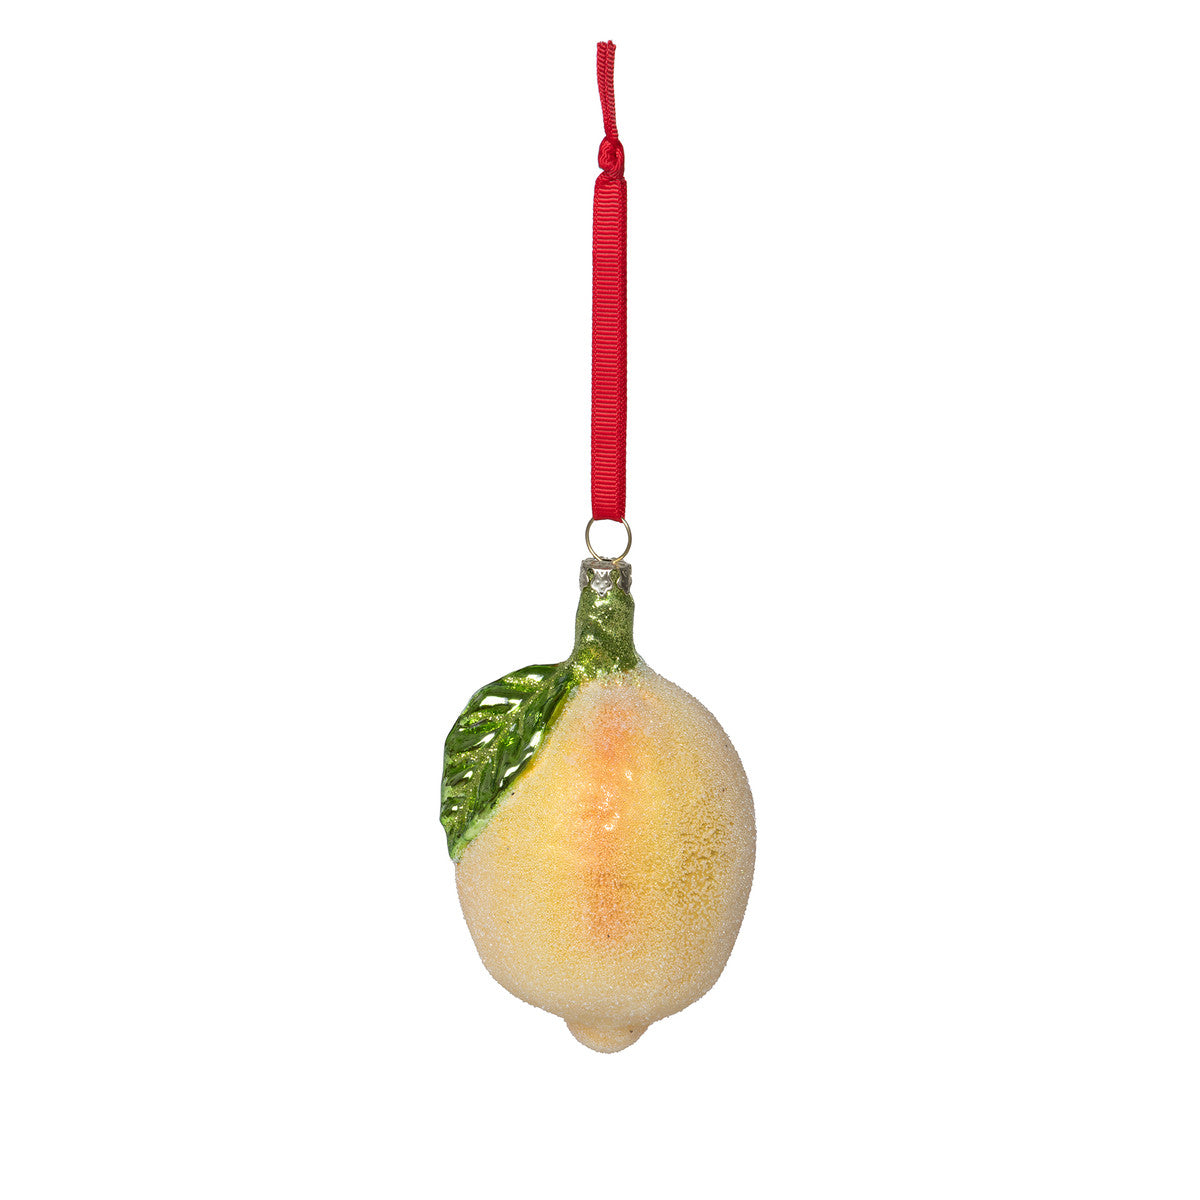 Glass Lemon Ornament Hanging From Red Ribbon